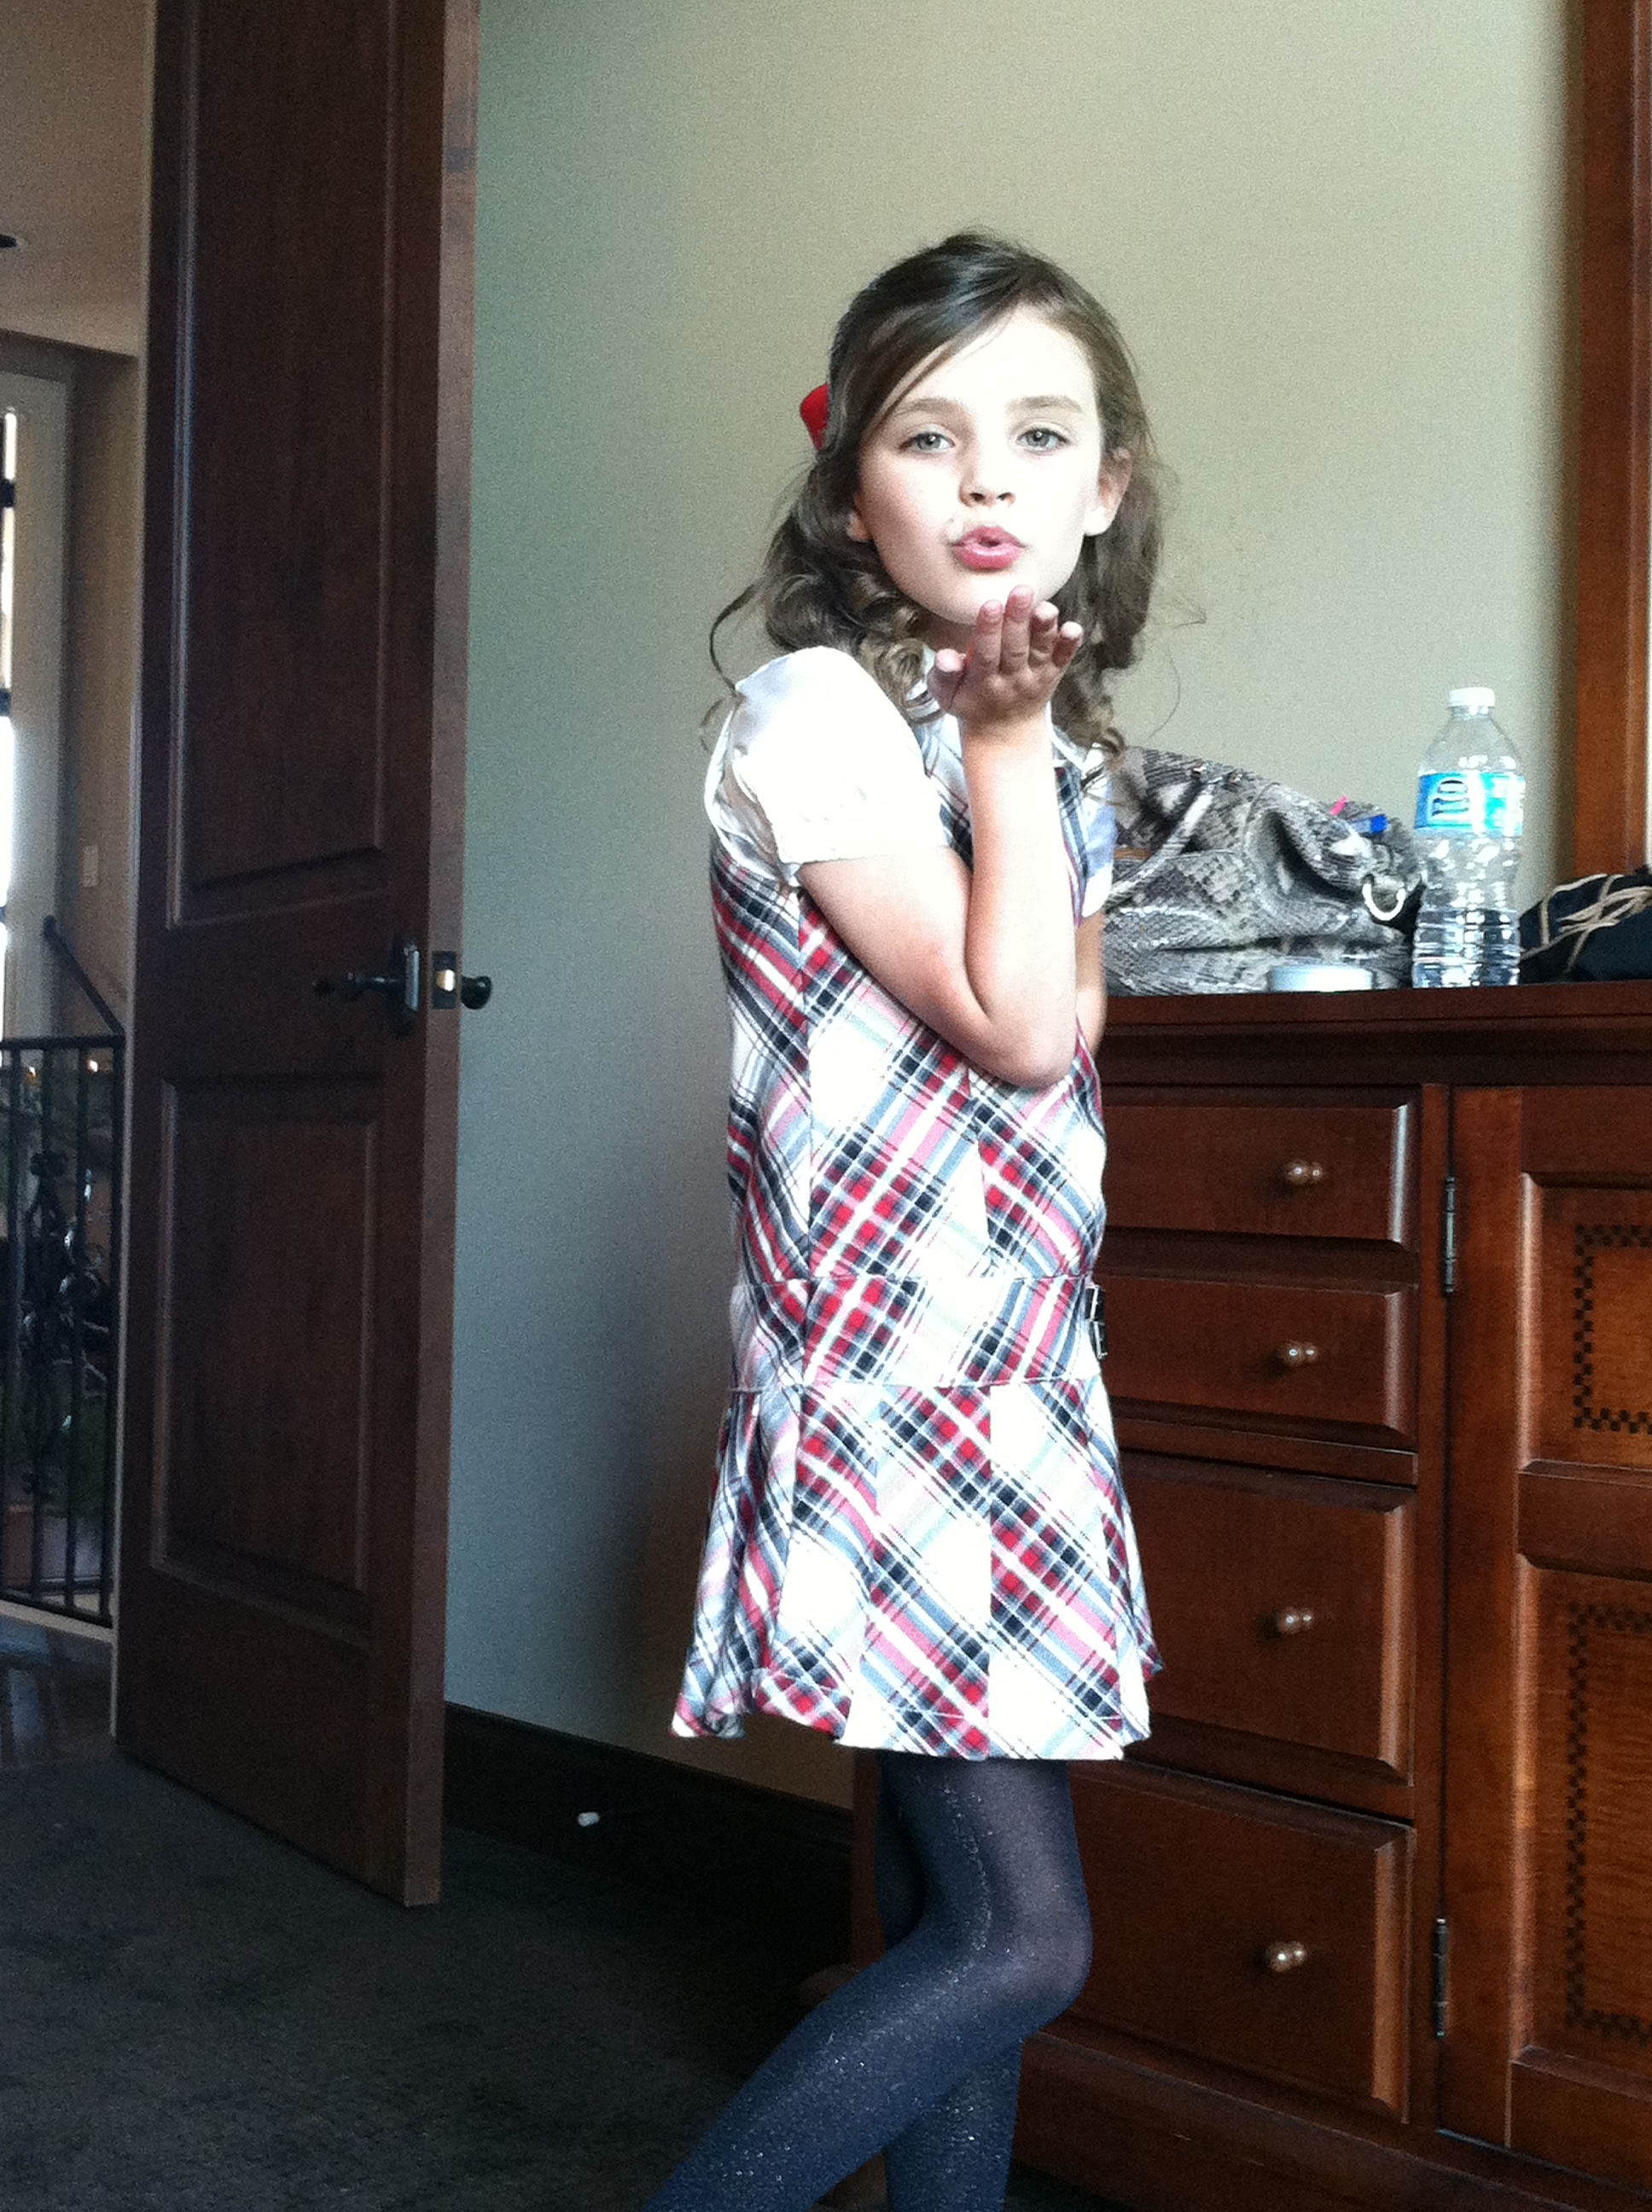 Avary on set for the Lady Antebellum music video 